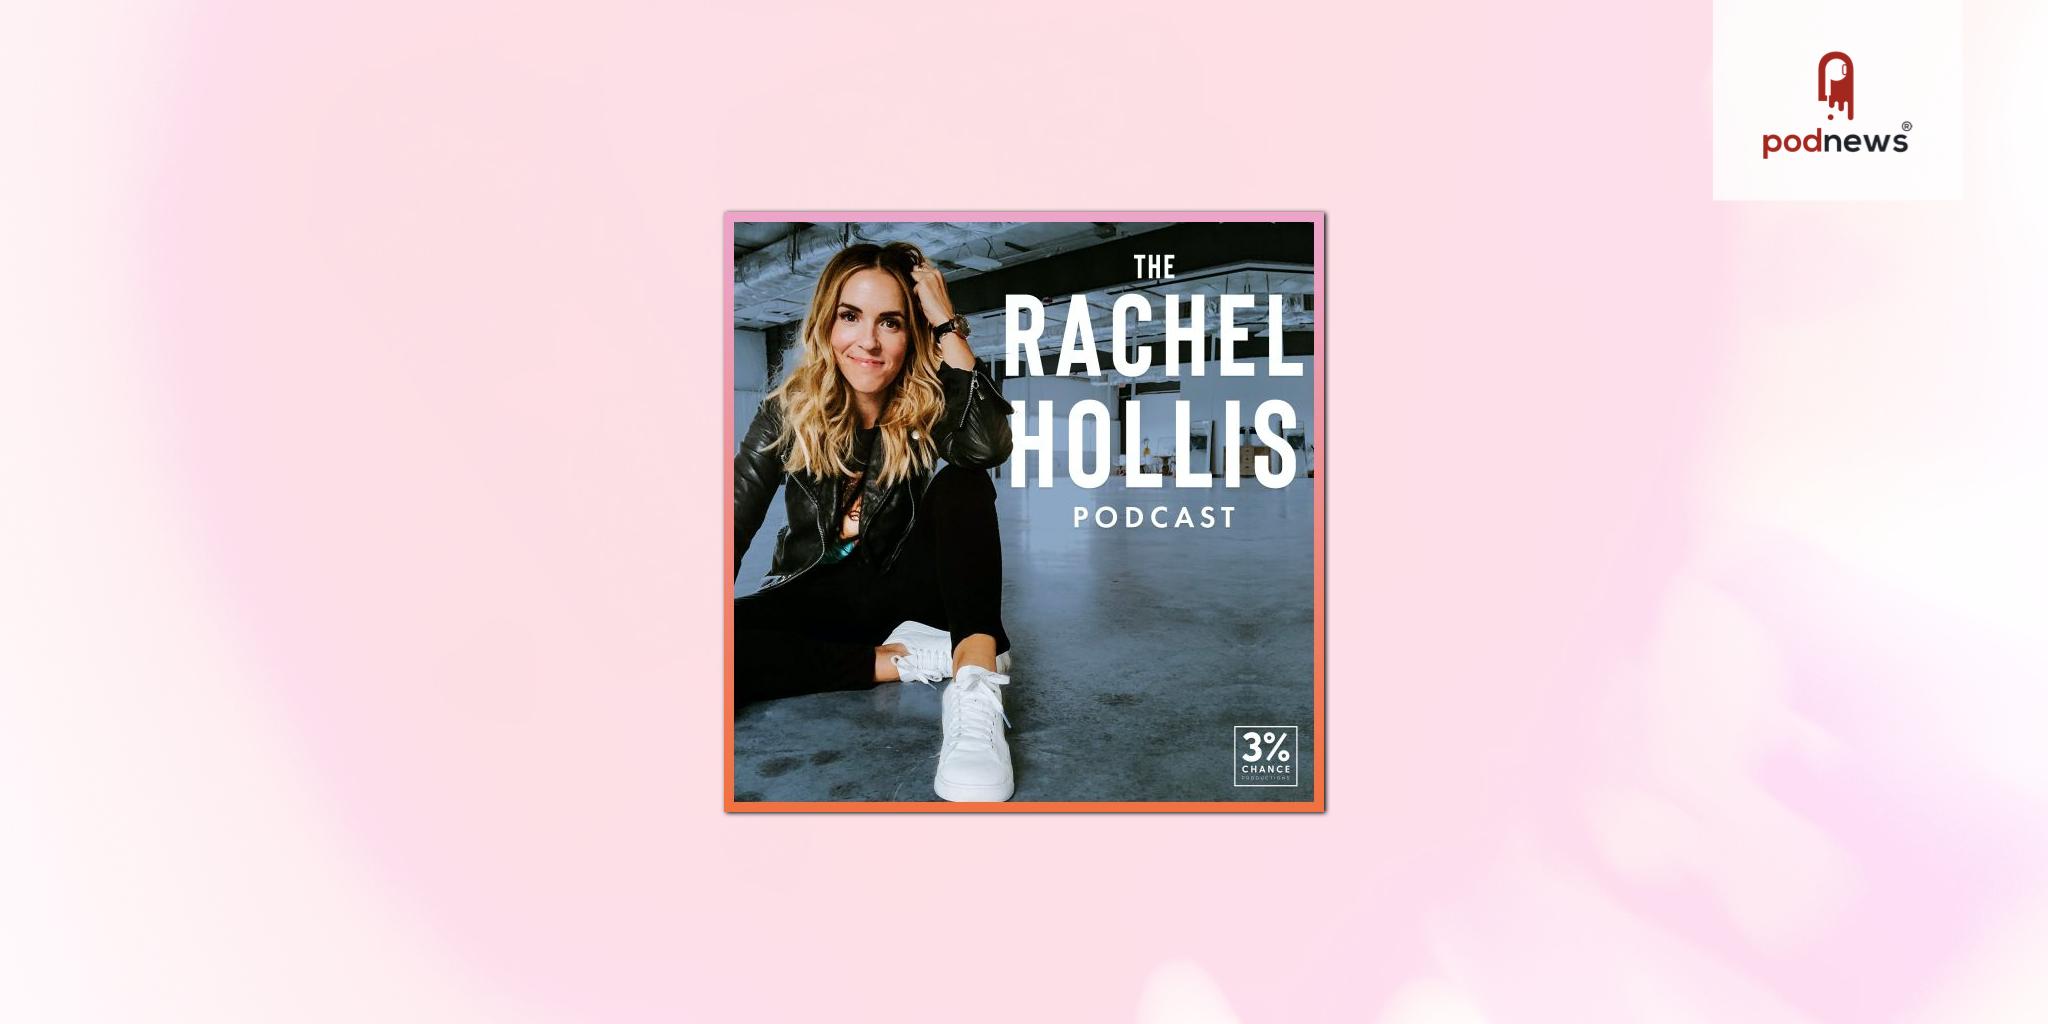 SiriusXM Announces Exclusive Agreement with The Rachel Hollis Podcast